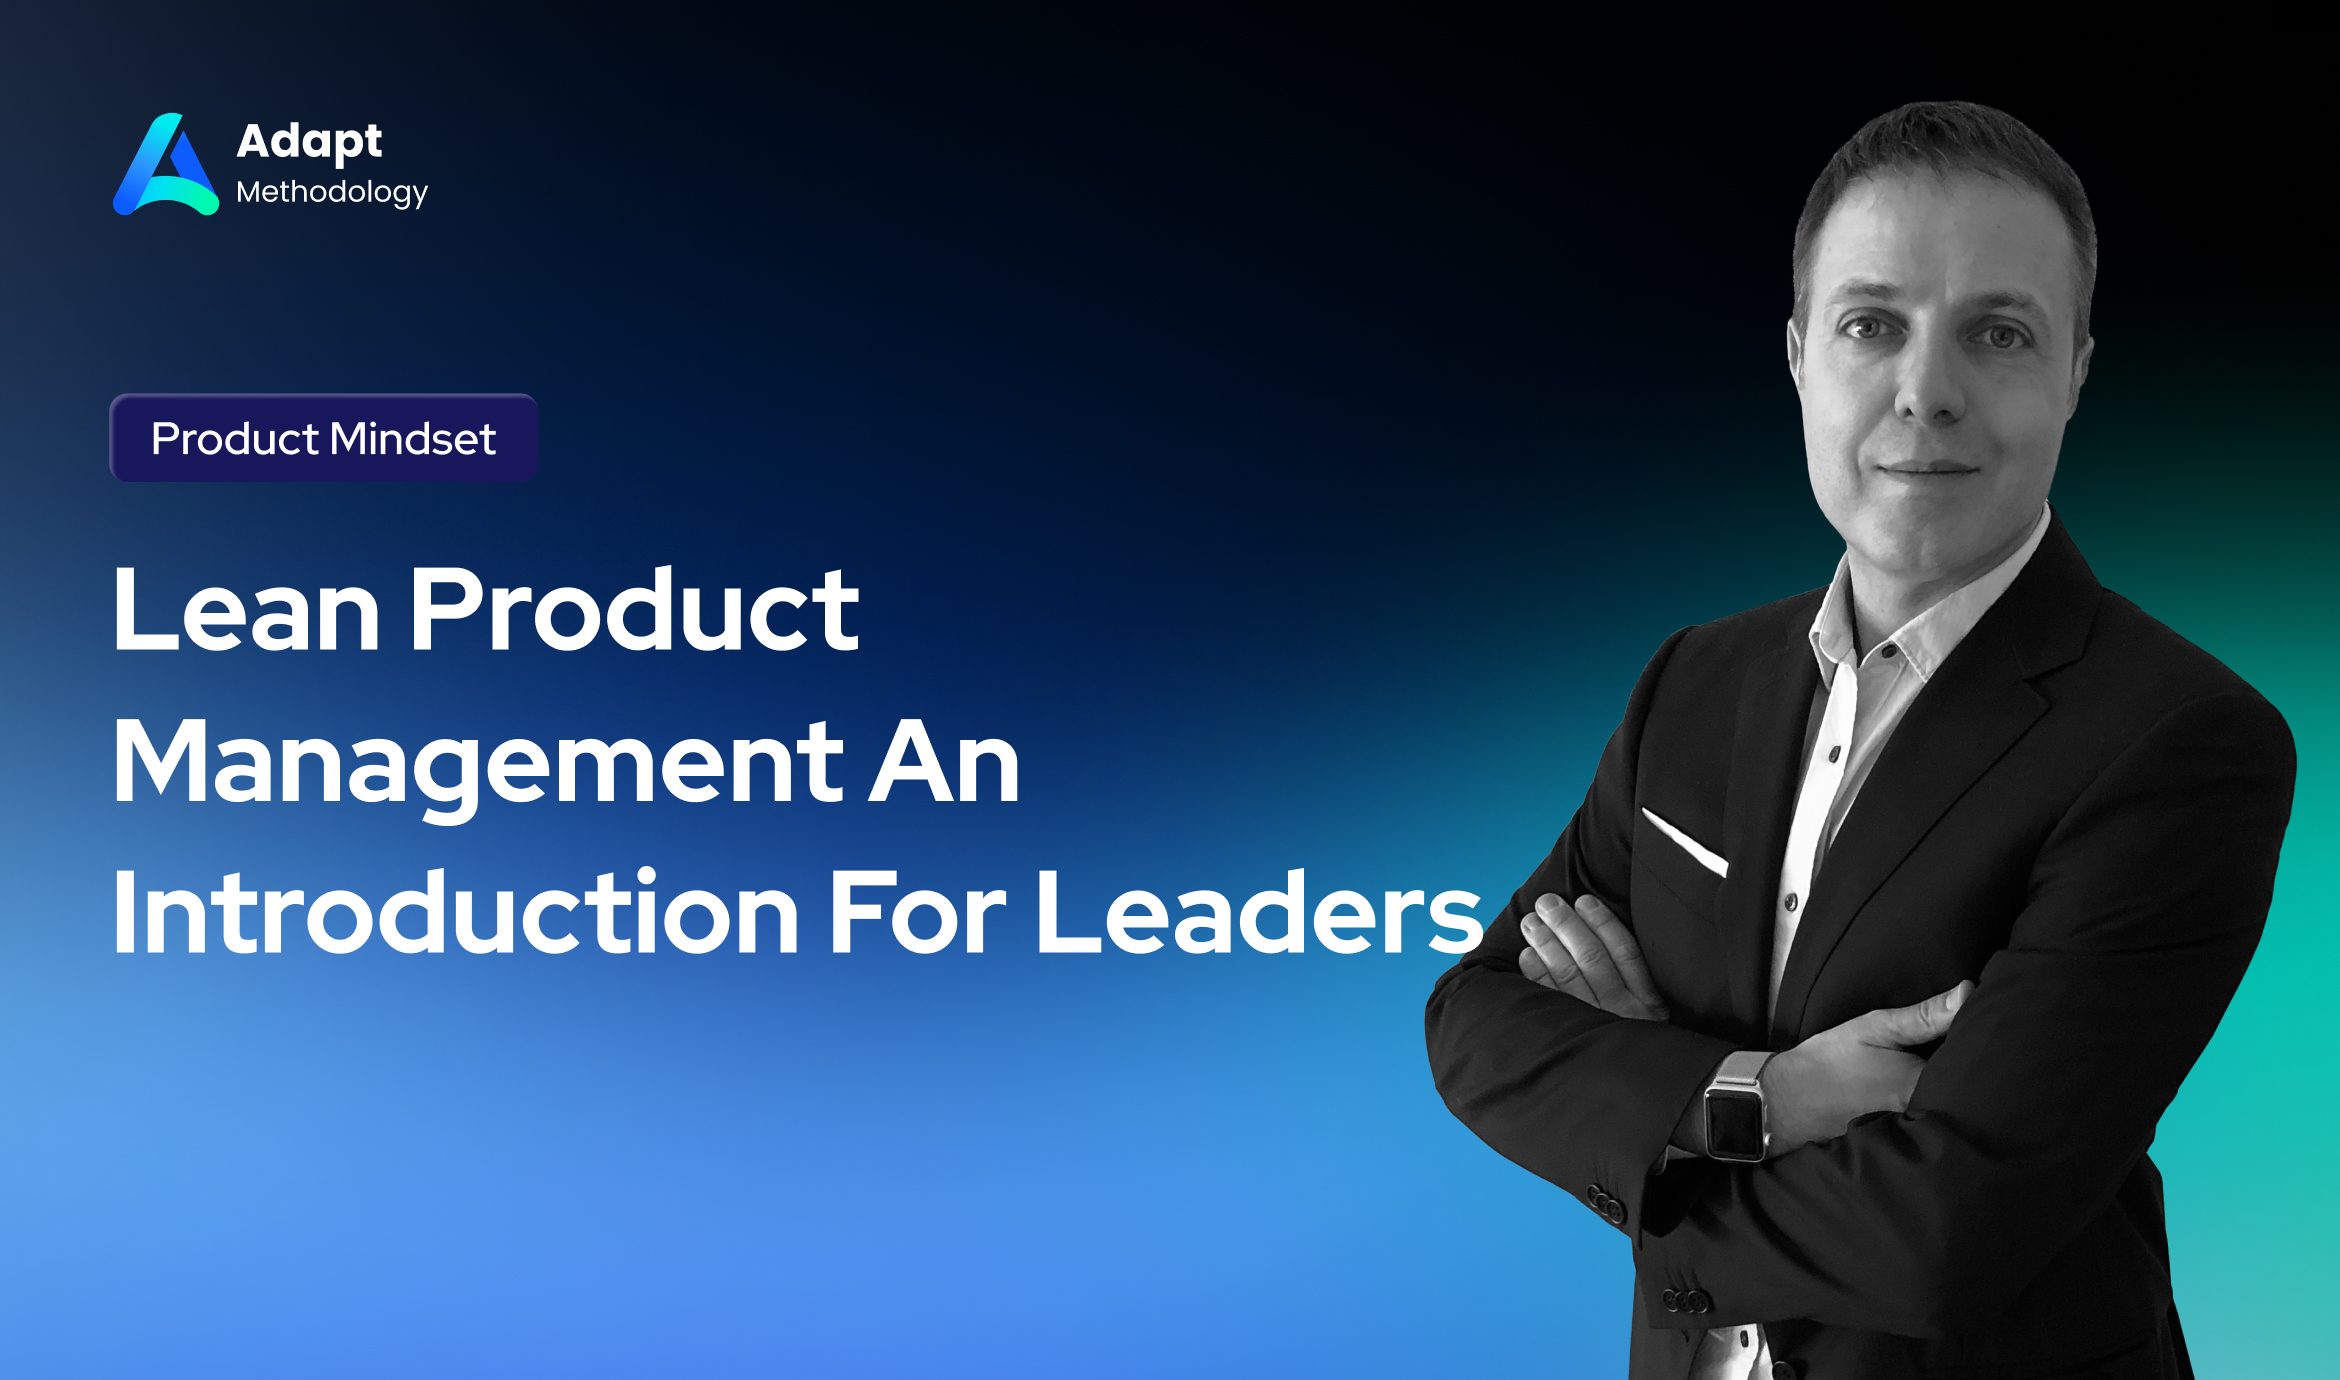 Lean Product Management An Introduction For Leaders